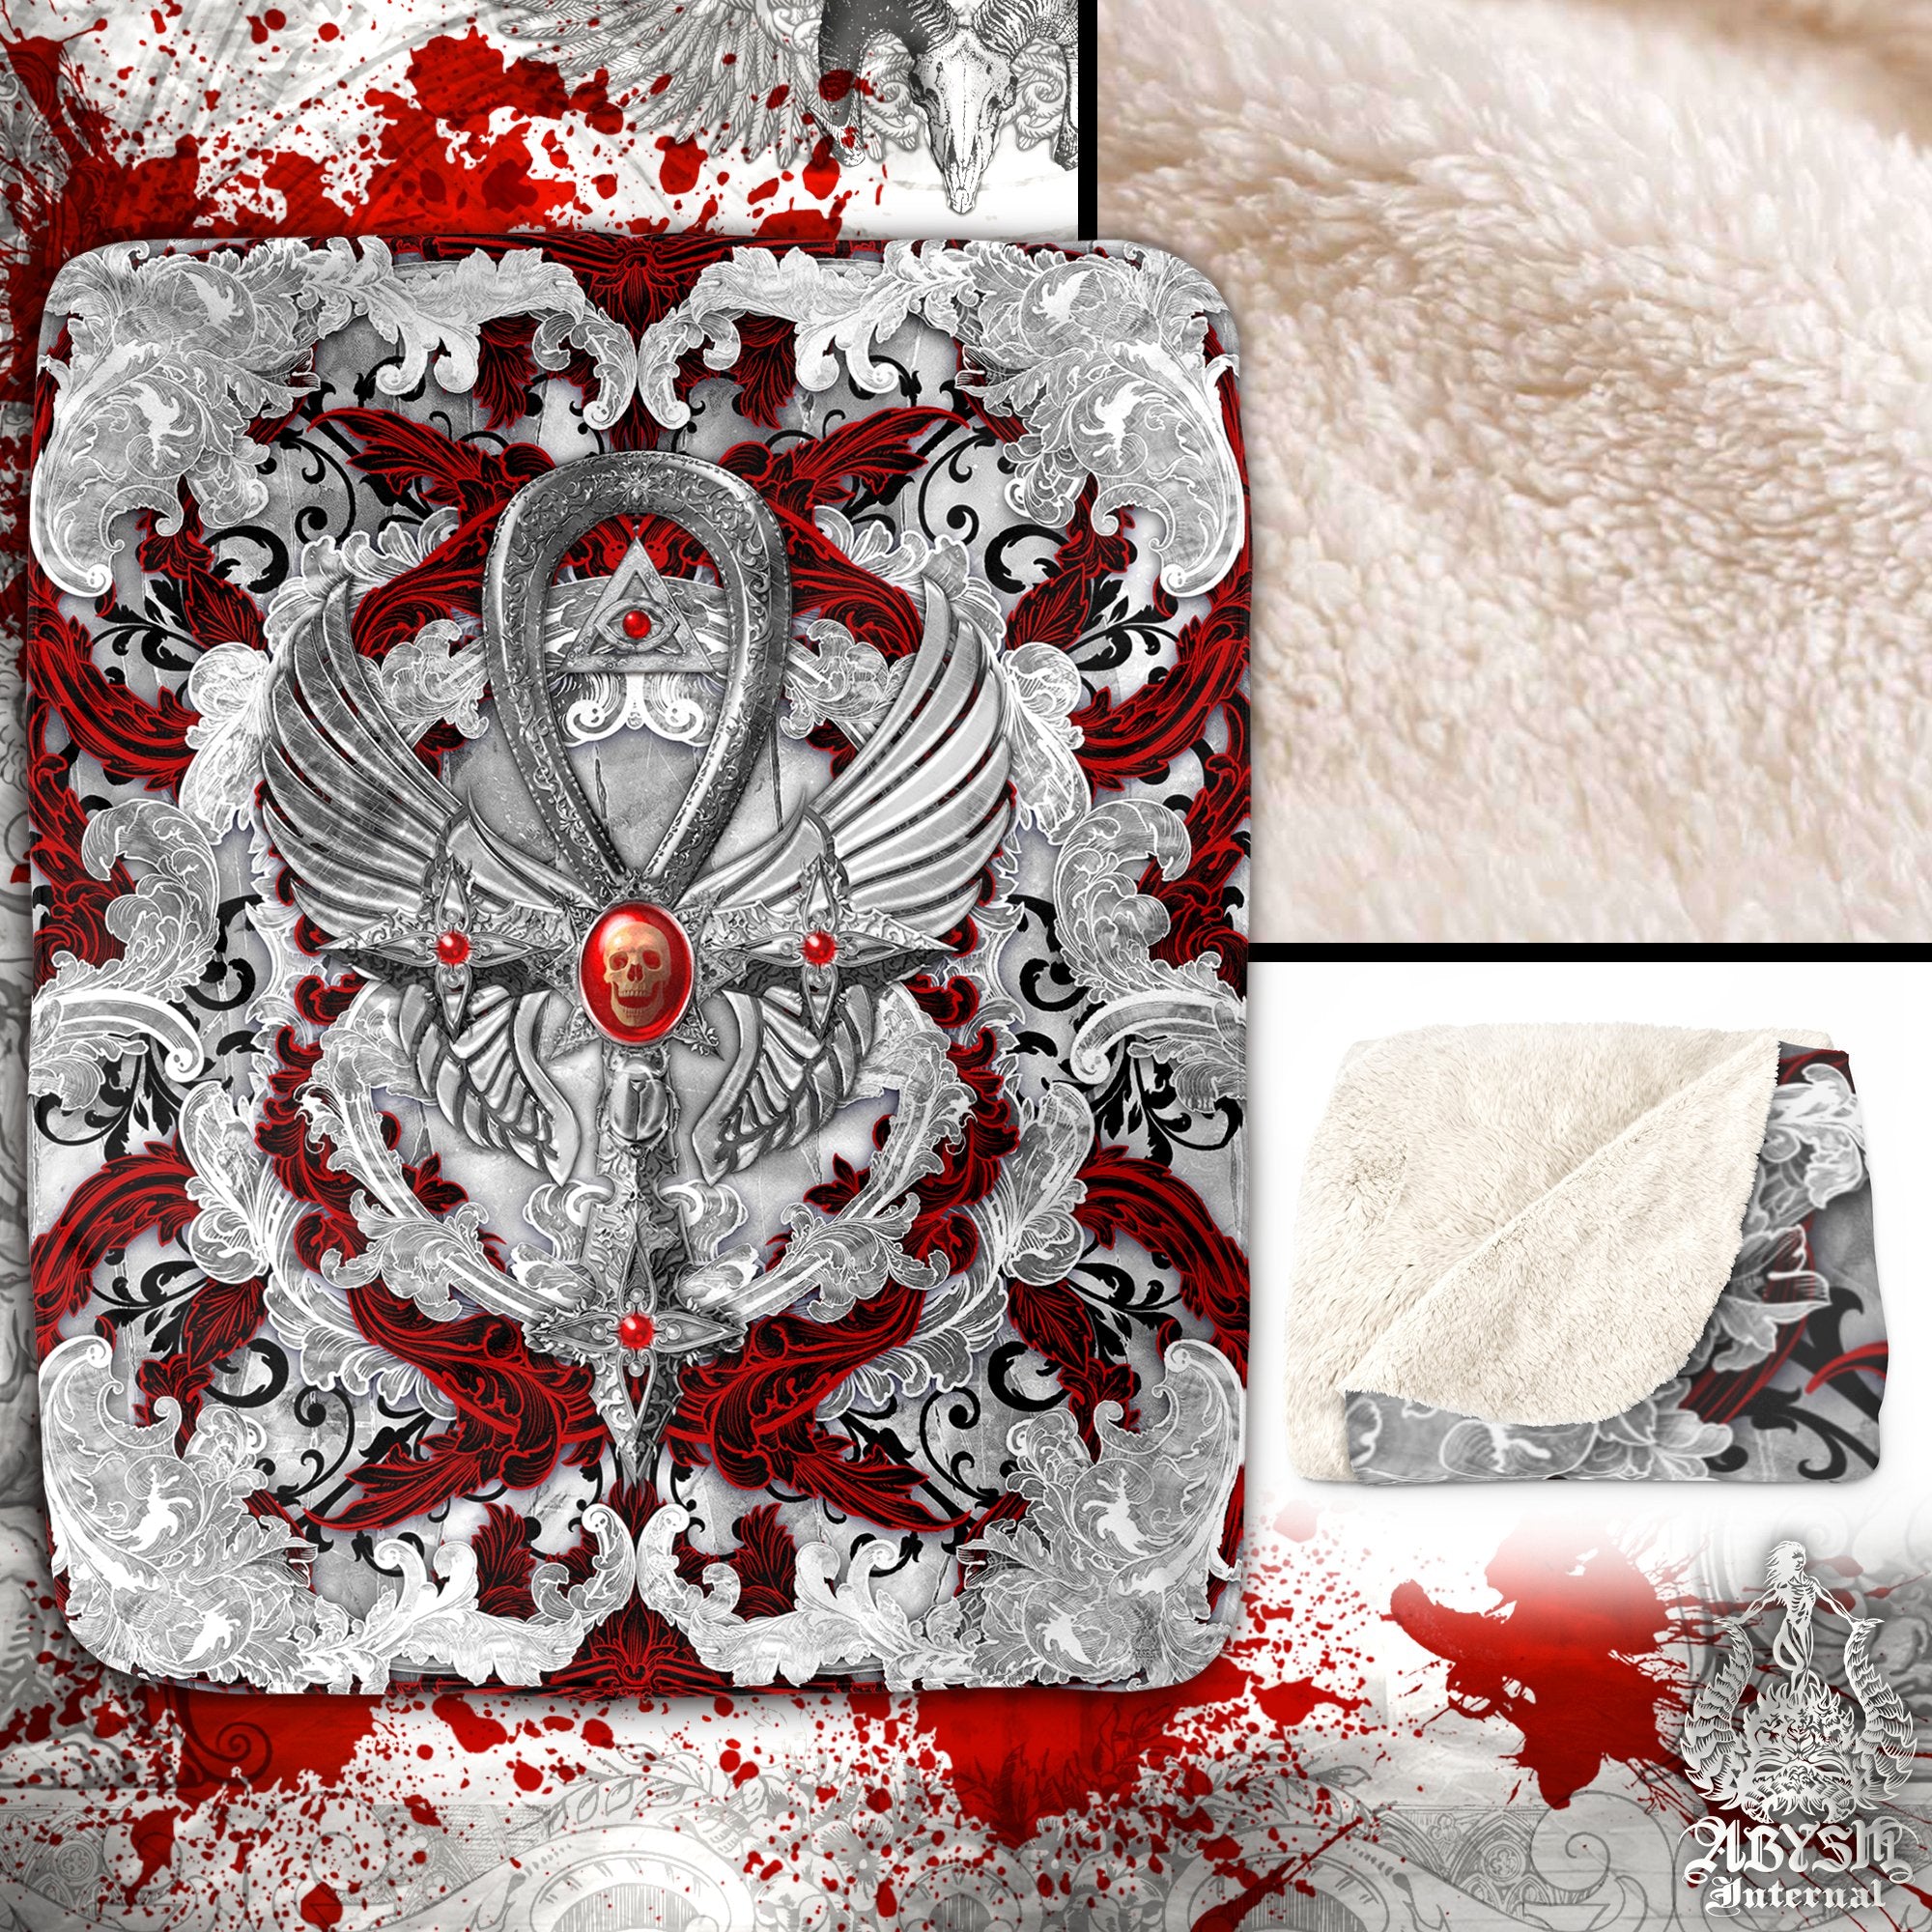 Bloody White Goth Sherpa Fleece Throw Blanket, Goth Ankh Cross Decor - Red, Black and White, 3 Colors - Abysm Internal